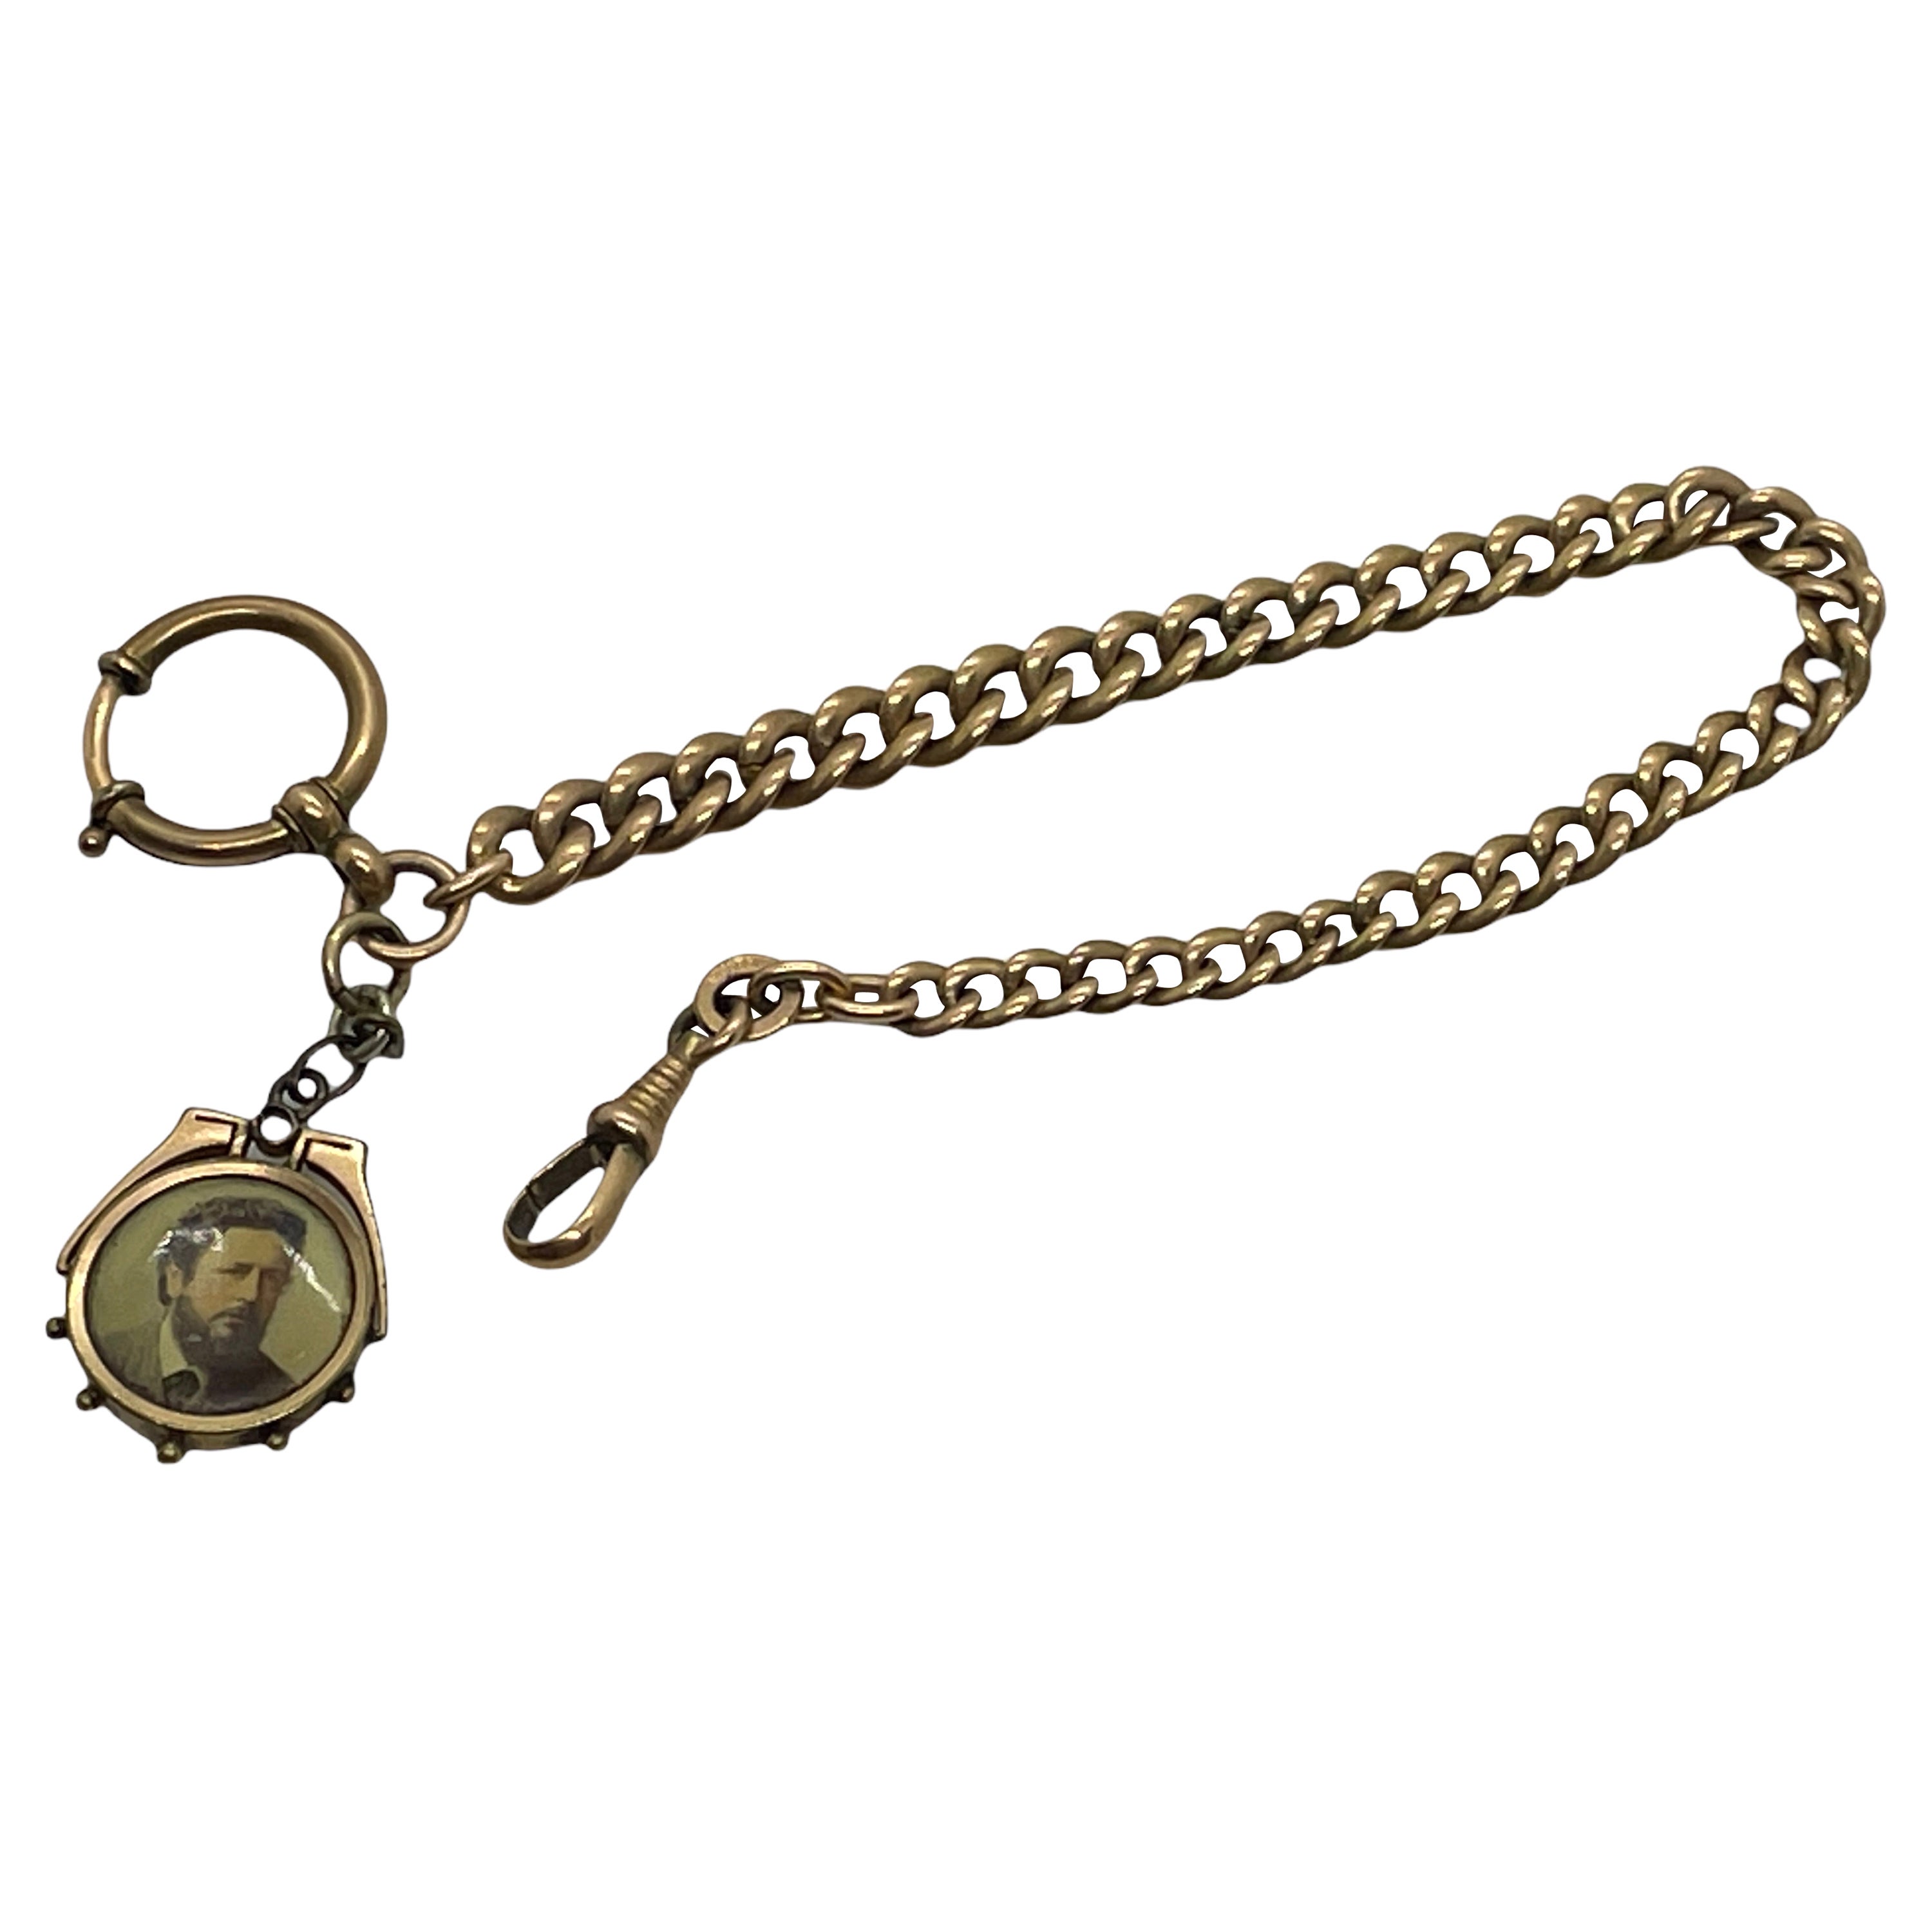 Antique German Art Nouveau Jewelry Pocket Watch Chain with Fob, 1900s